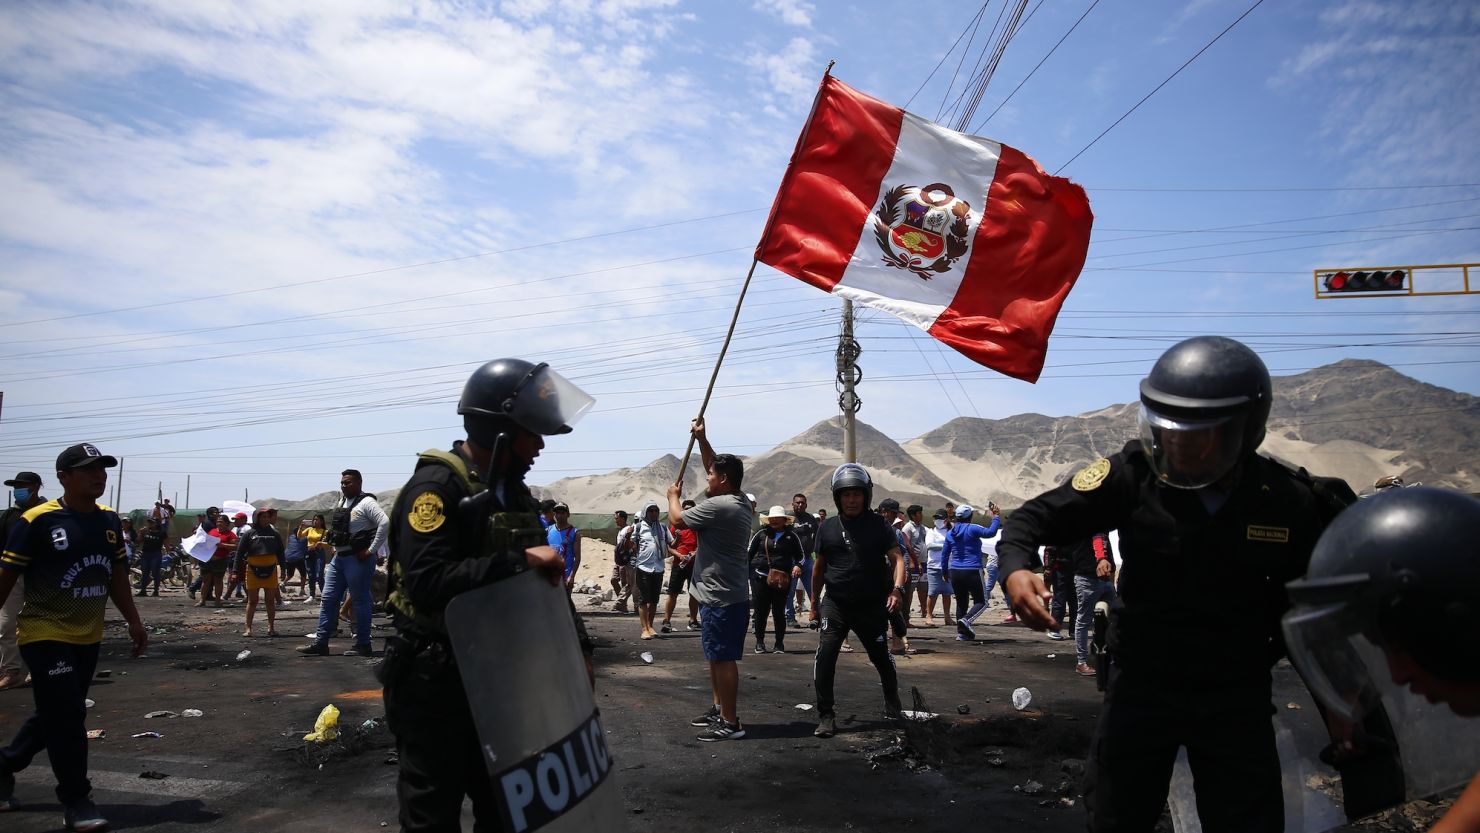 Supporters of ousted Peruvian President Pedro Castillo protest on the Pan-American North Highway while police officers arrive to clear debris, in Chao, Peru, Thursday, Dec. 15, 2022. 